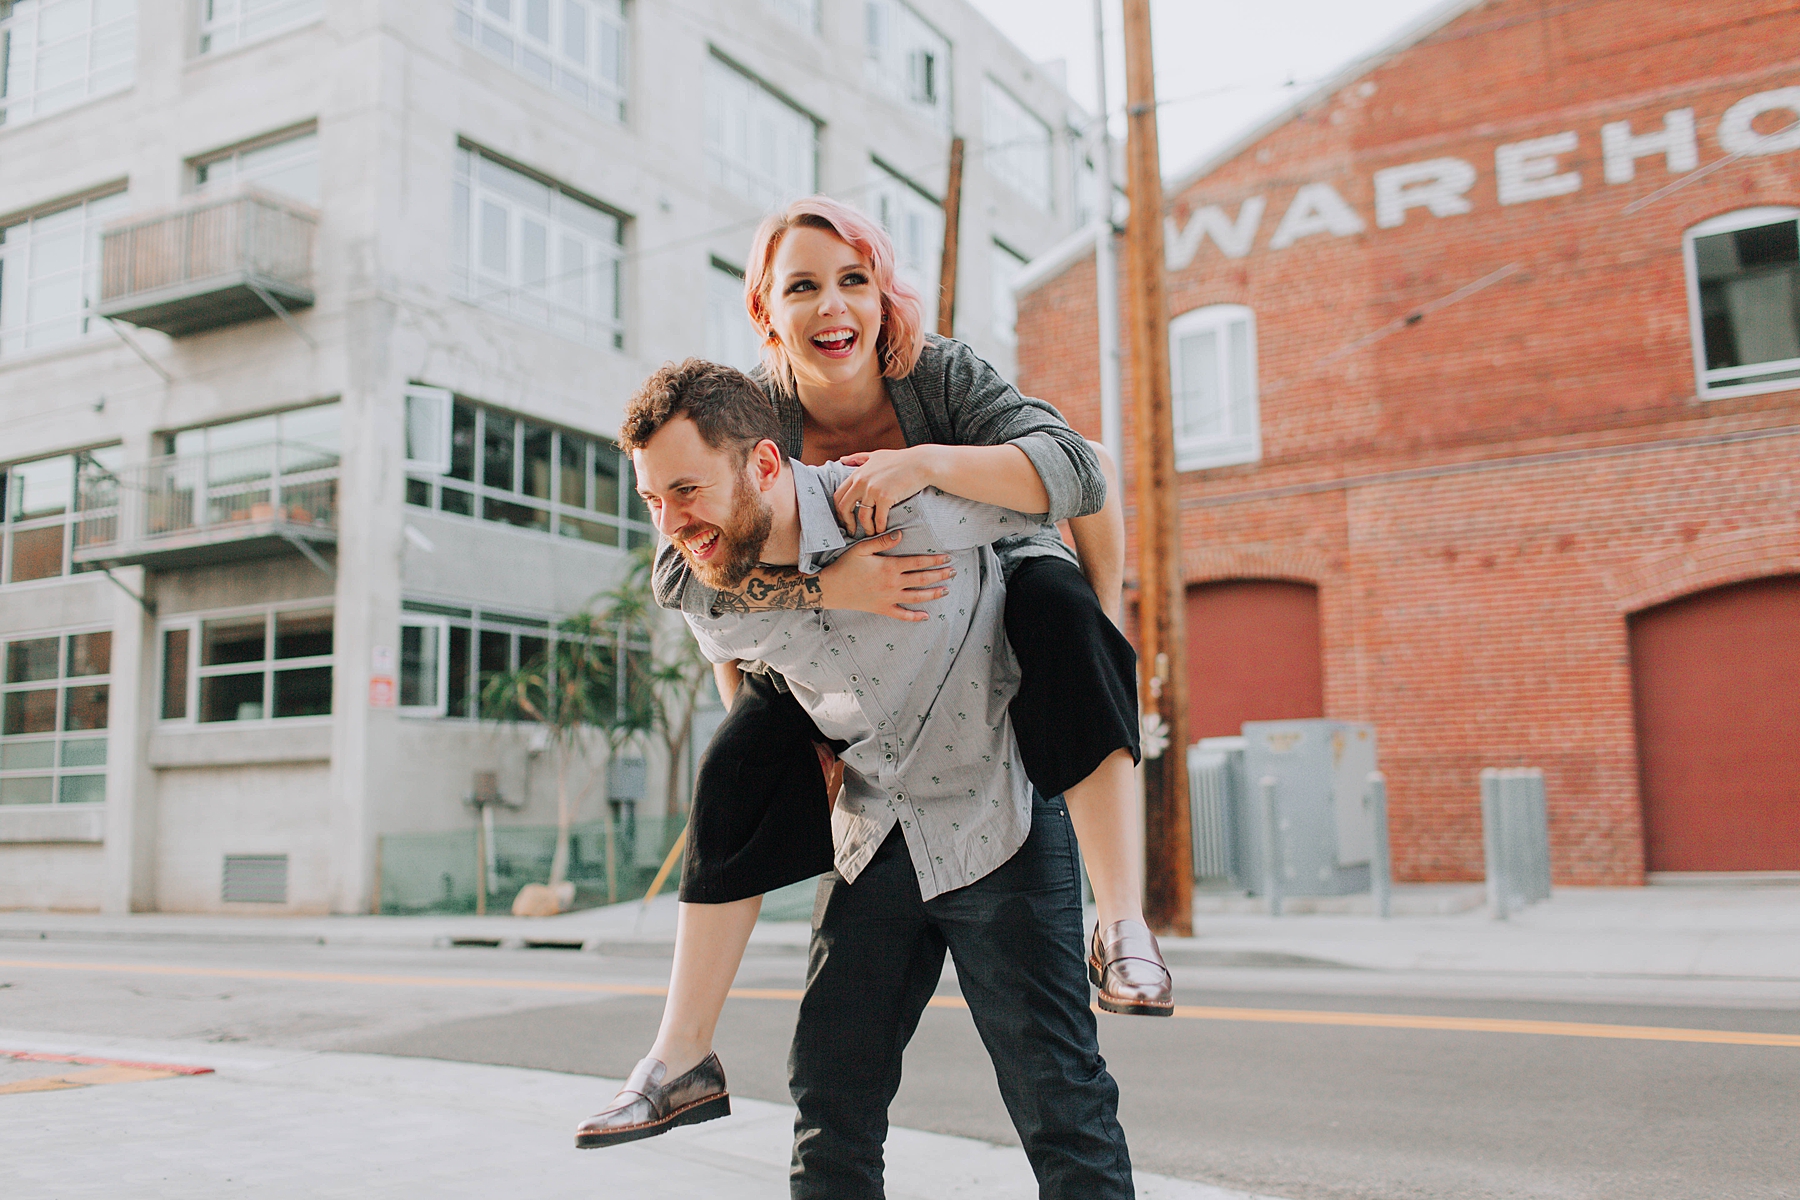 Downtown Los Angeles Engagement Photo Shoot